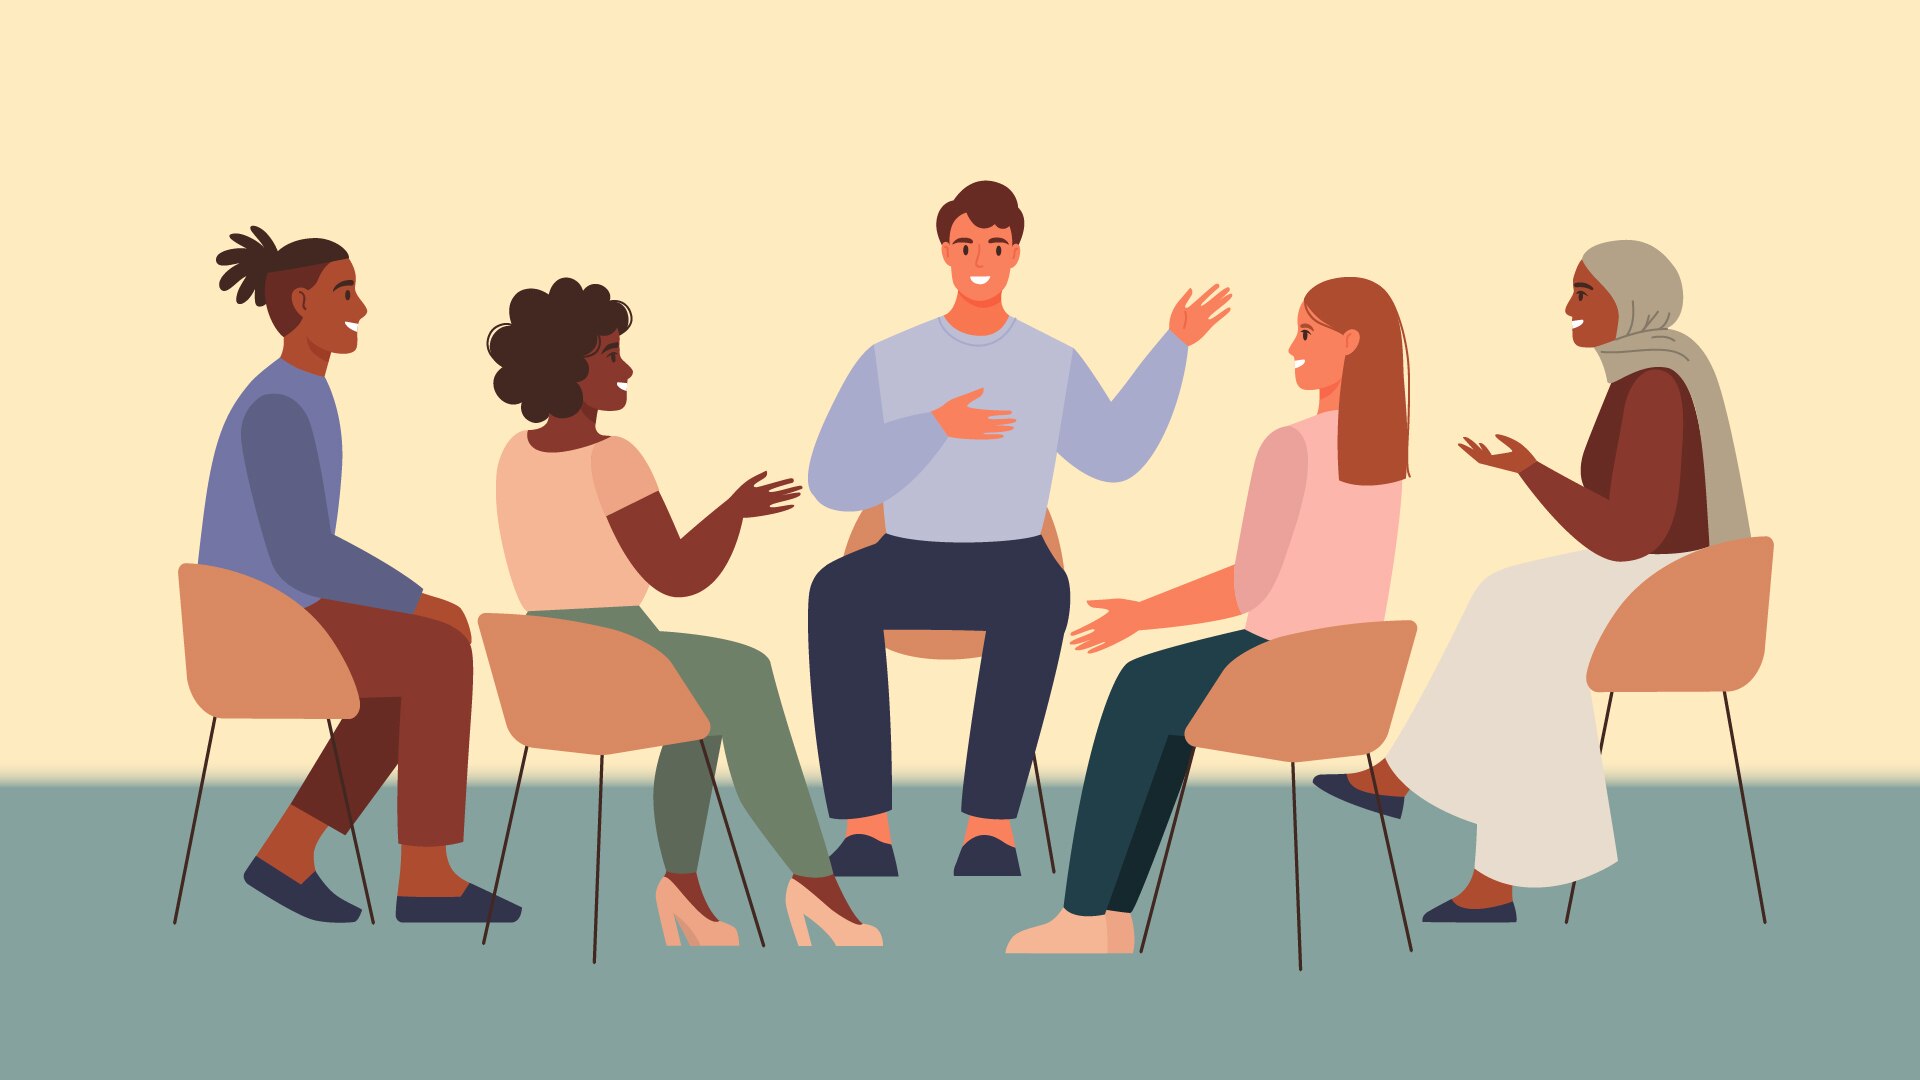 An illustration showing people from diverse backgrounds sitting in circle and talking